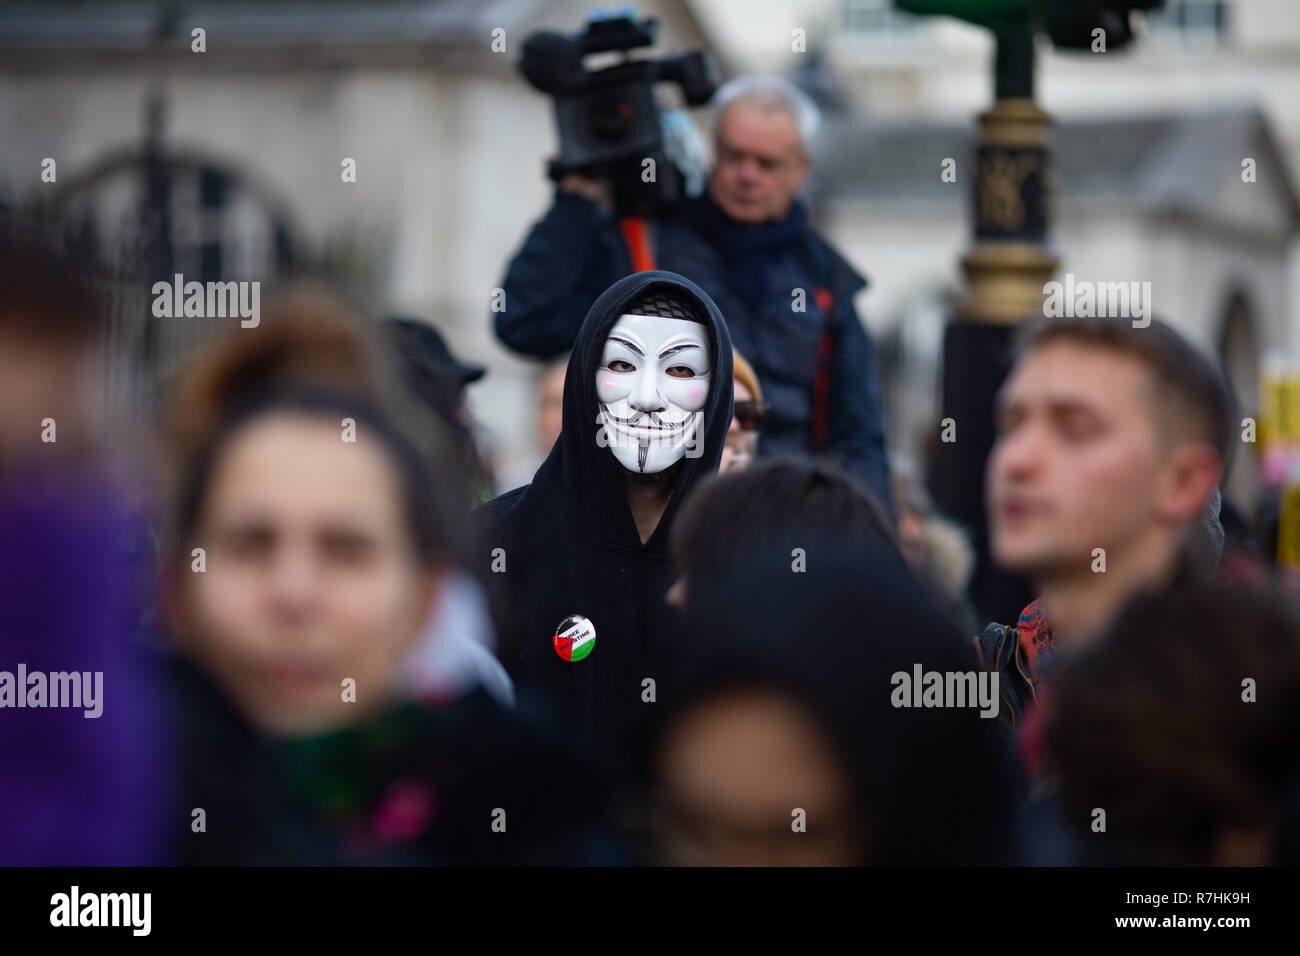 A masked Anti-facist demonstrator looks onwards as the demonstration commences.   3,000 Pro-Brexit demonstrators and 15,000 Anti-Facist counter demonstrators took to the streets of London to voice their stance on the deal ahead of the key Brexit vote in parliament this Tuesday. Stock Photo